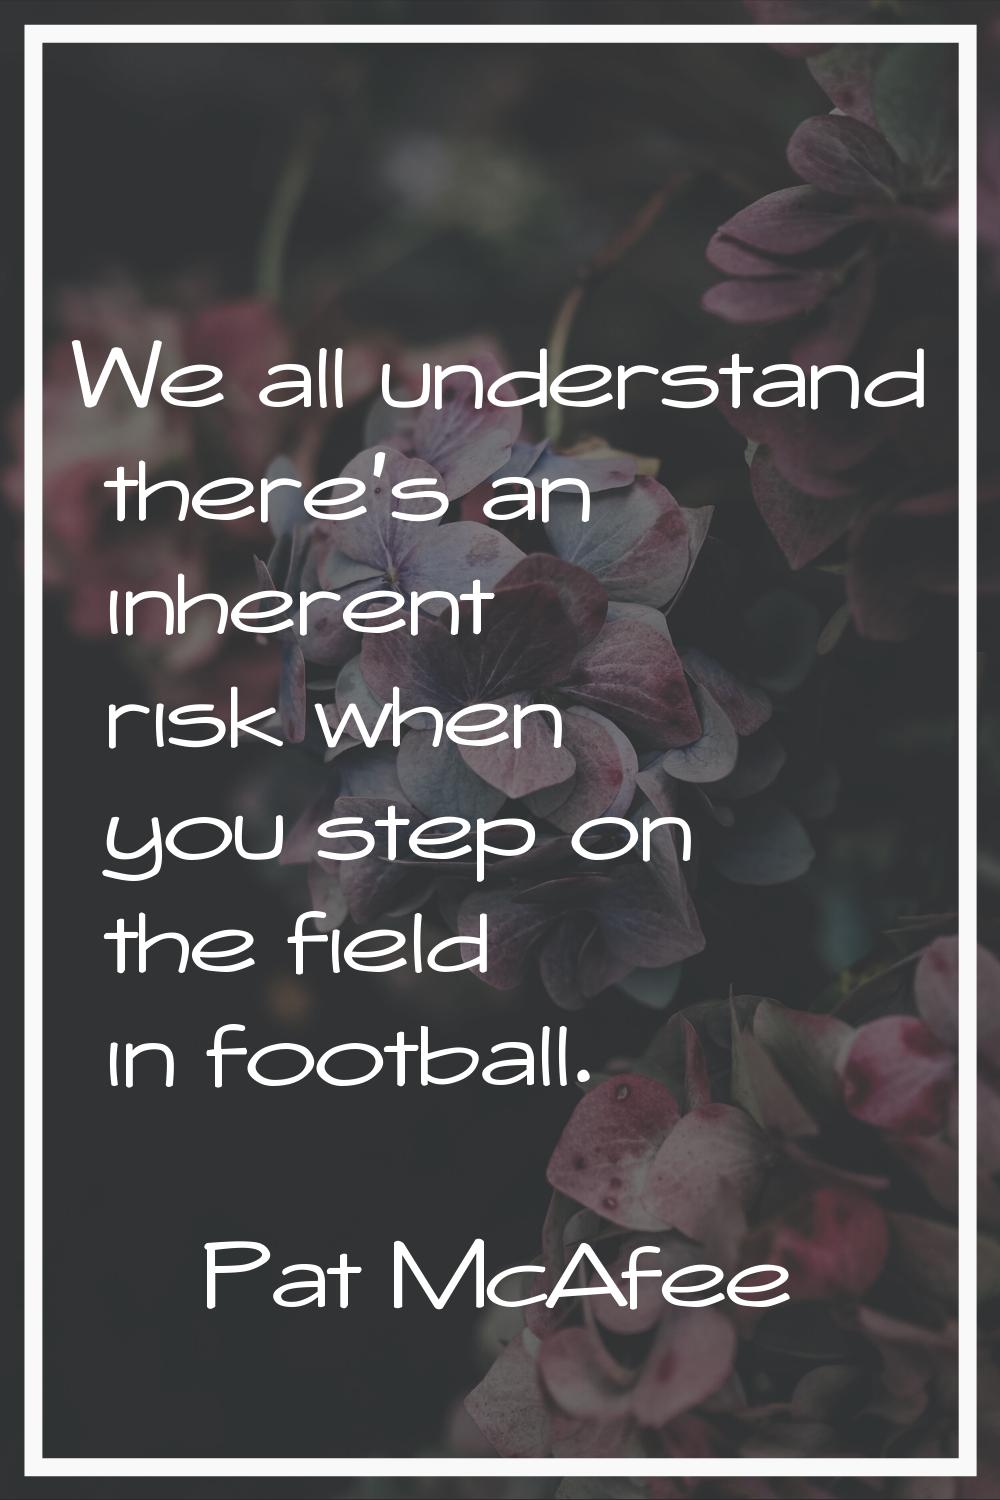 We all understand there's an inherent risk when you step on the field in football.